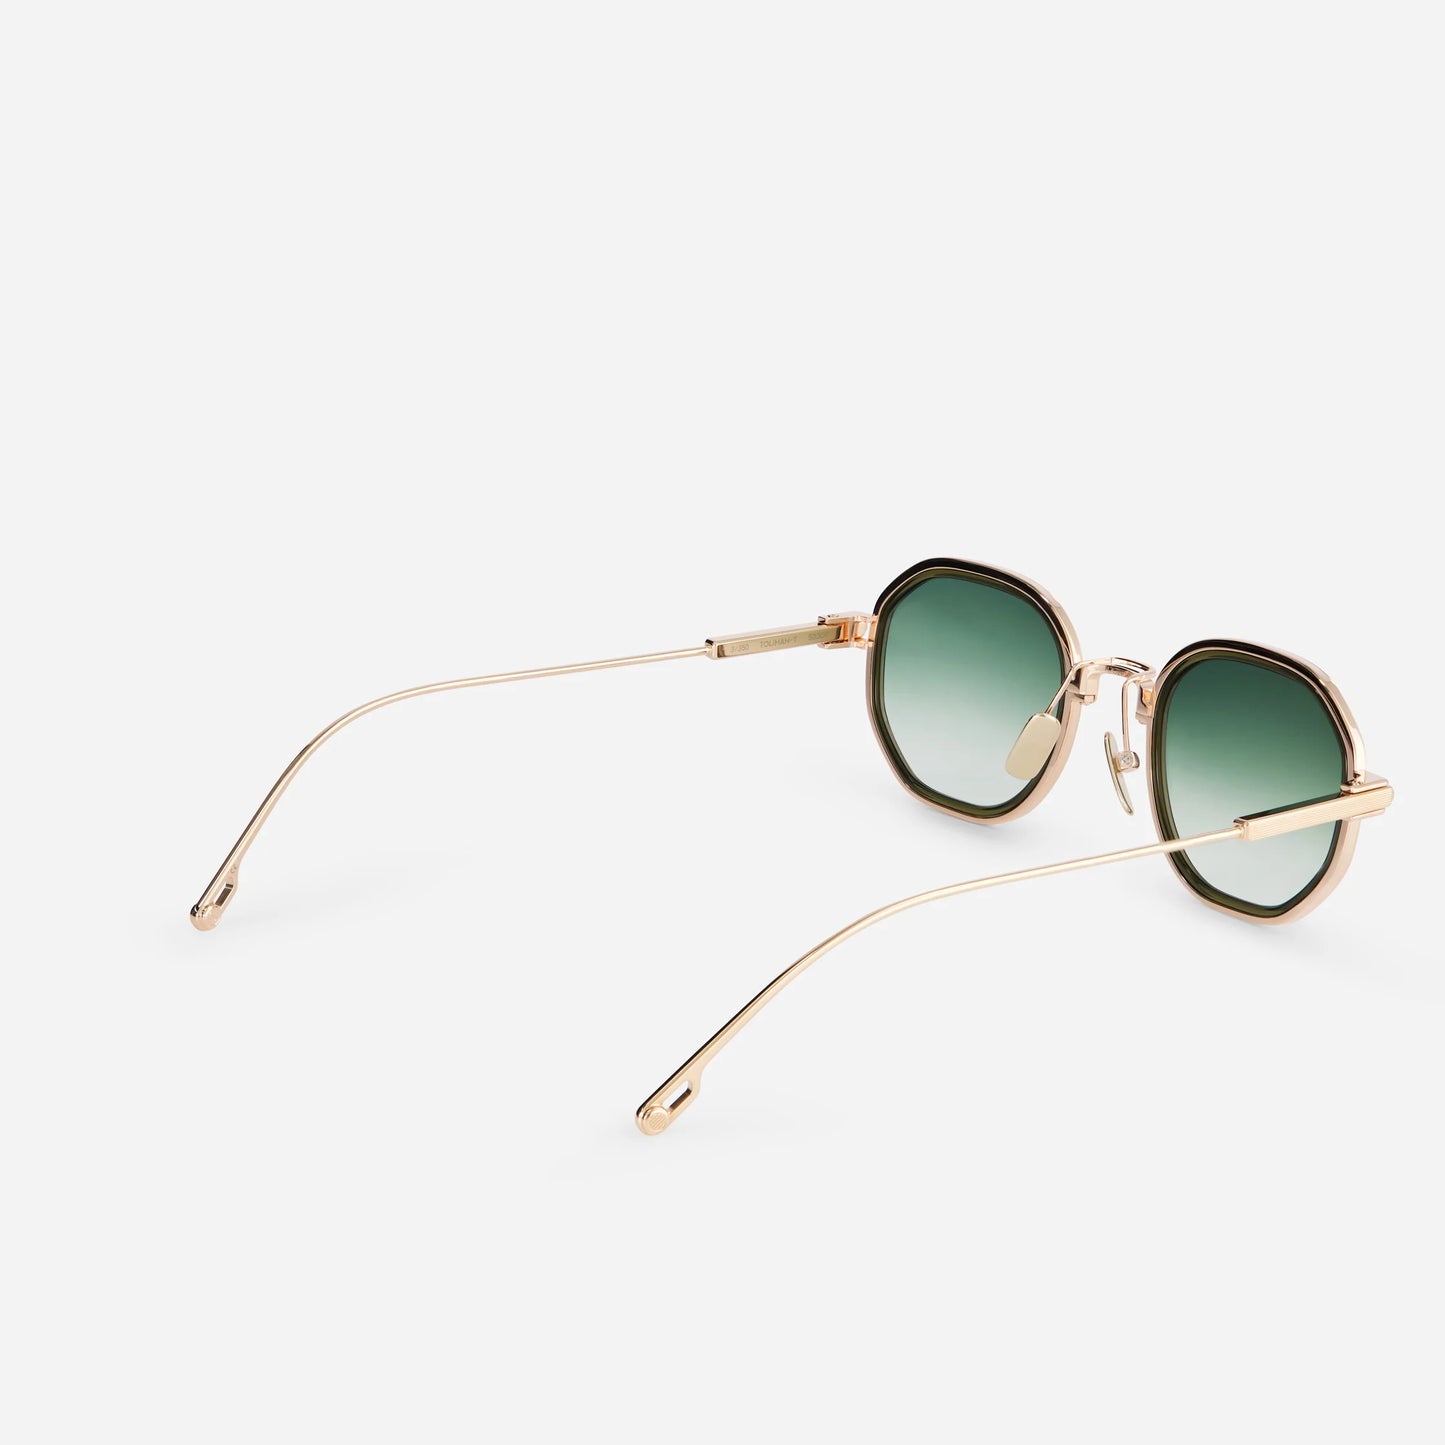 Step into the world of luxury with Toliman-T S3309 hexagonal sunglasses. Expertly crafted in pure rose gold titanium, these eyewear pieces feature green gradient lenses and an exquisite olive green insert.